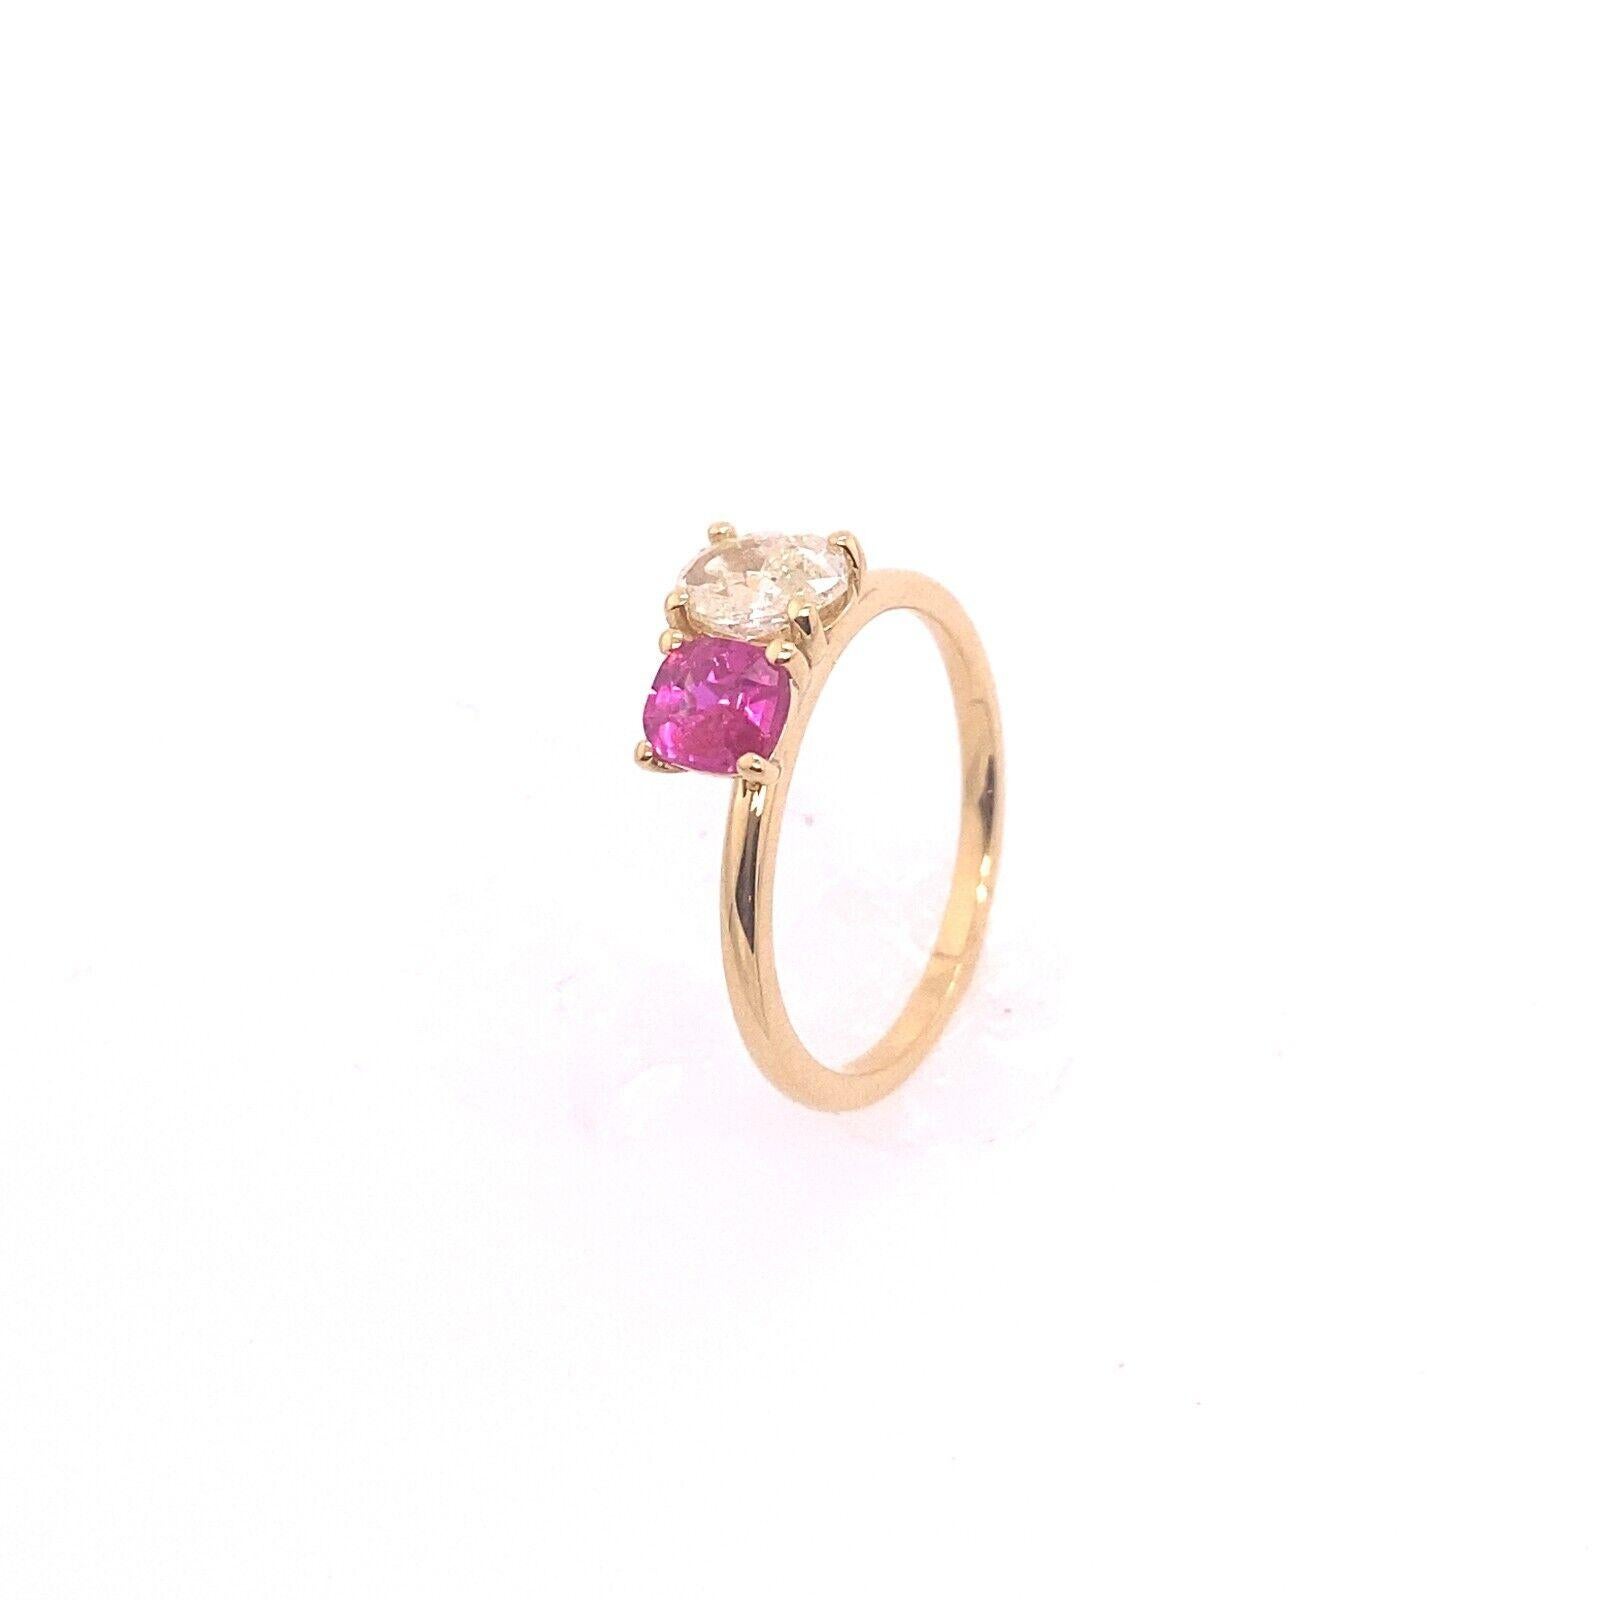 Natural Yellow Oval Diamond 0.62ct & Cushion Shape Ruby Ring, Set In 18ct Gold
A unique combination of natural Yellow Oval Diamond and cushion shape Ruby, this ring is a one of a kind design. The oval Diamond is 0.62ct and 0.51ct cushion shape Ruby